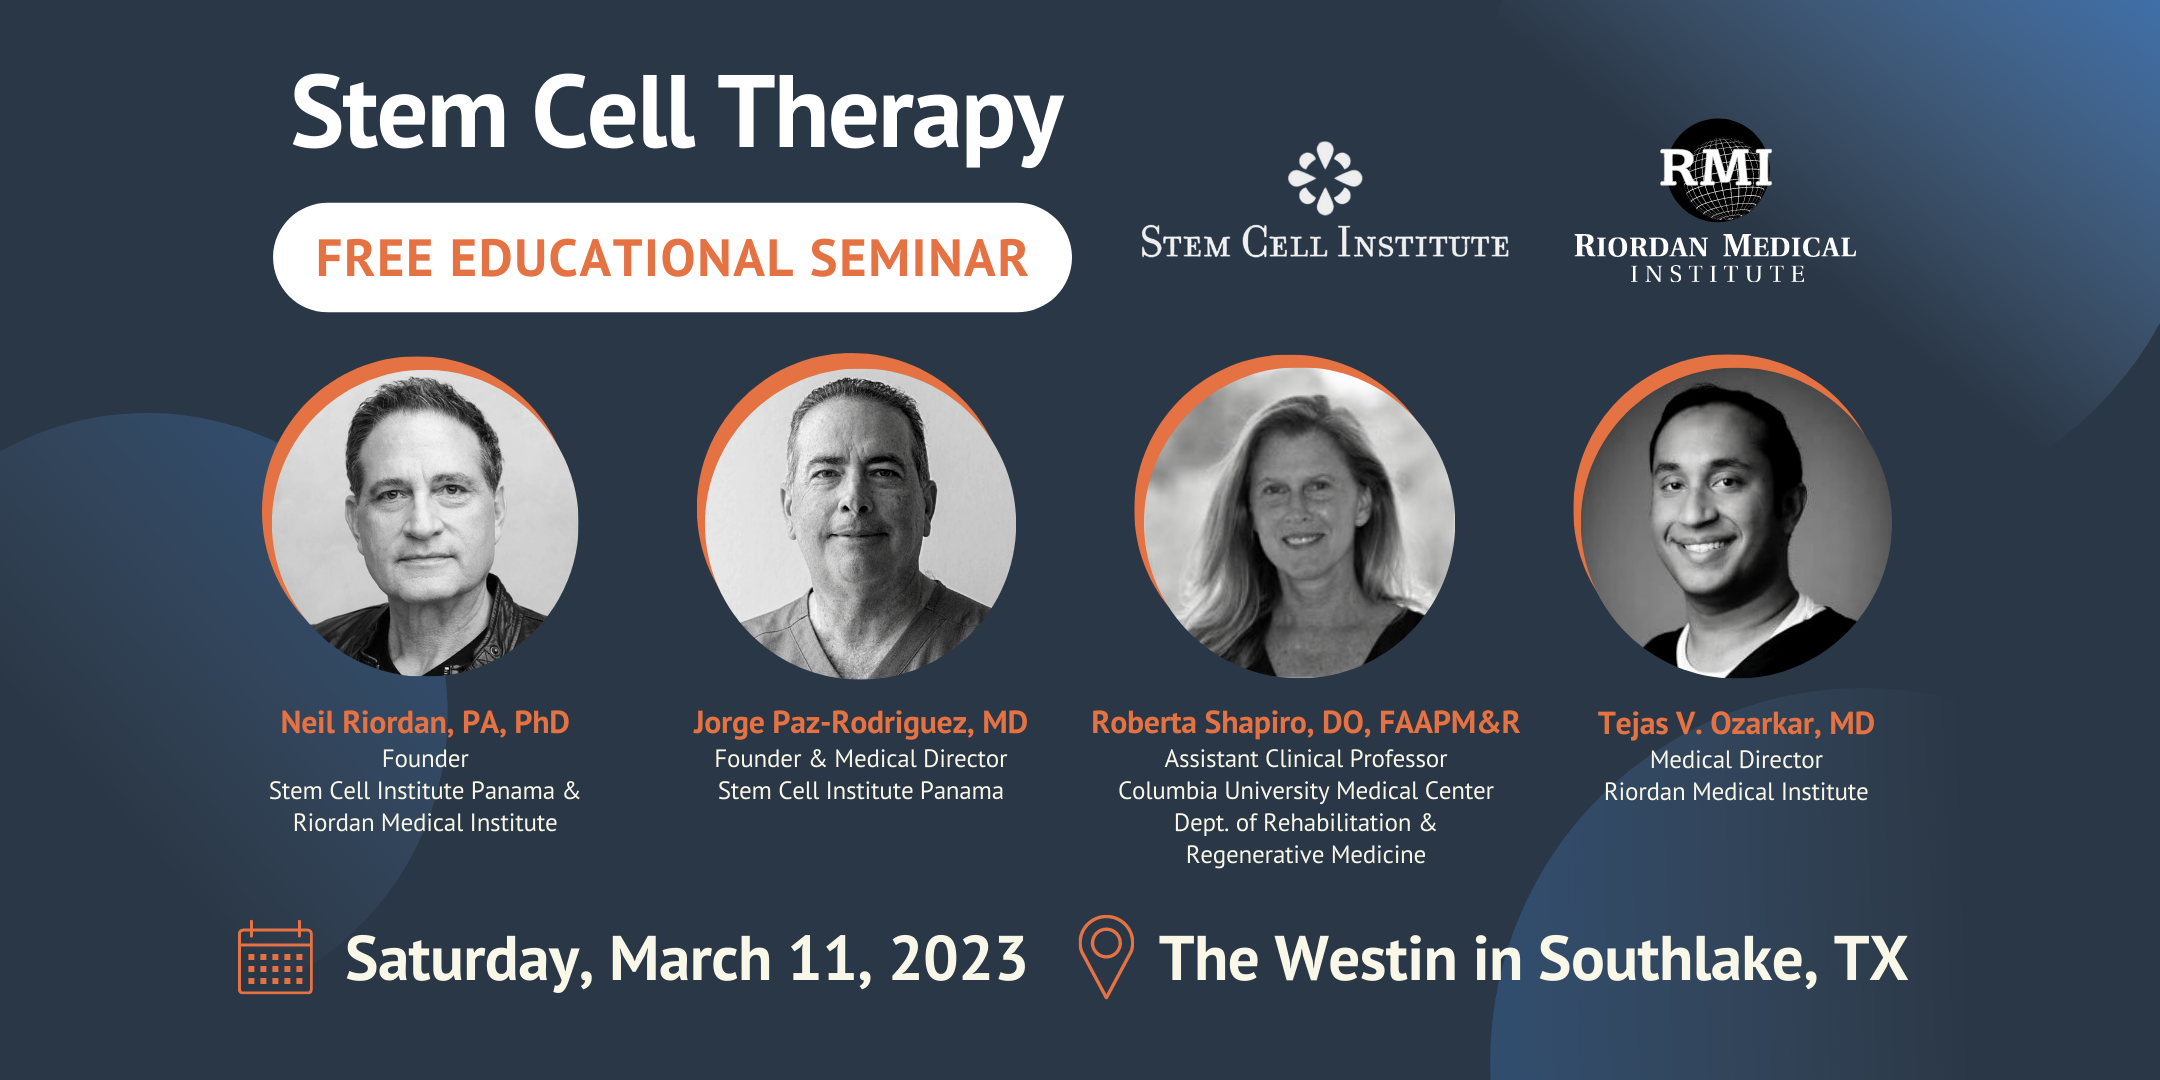 Free Educational Seminar on Stem Cell Therapy: Register Today!